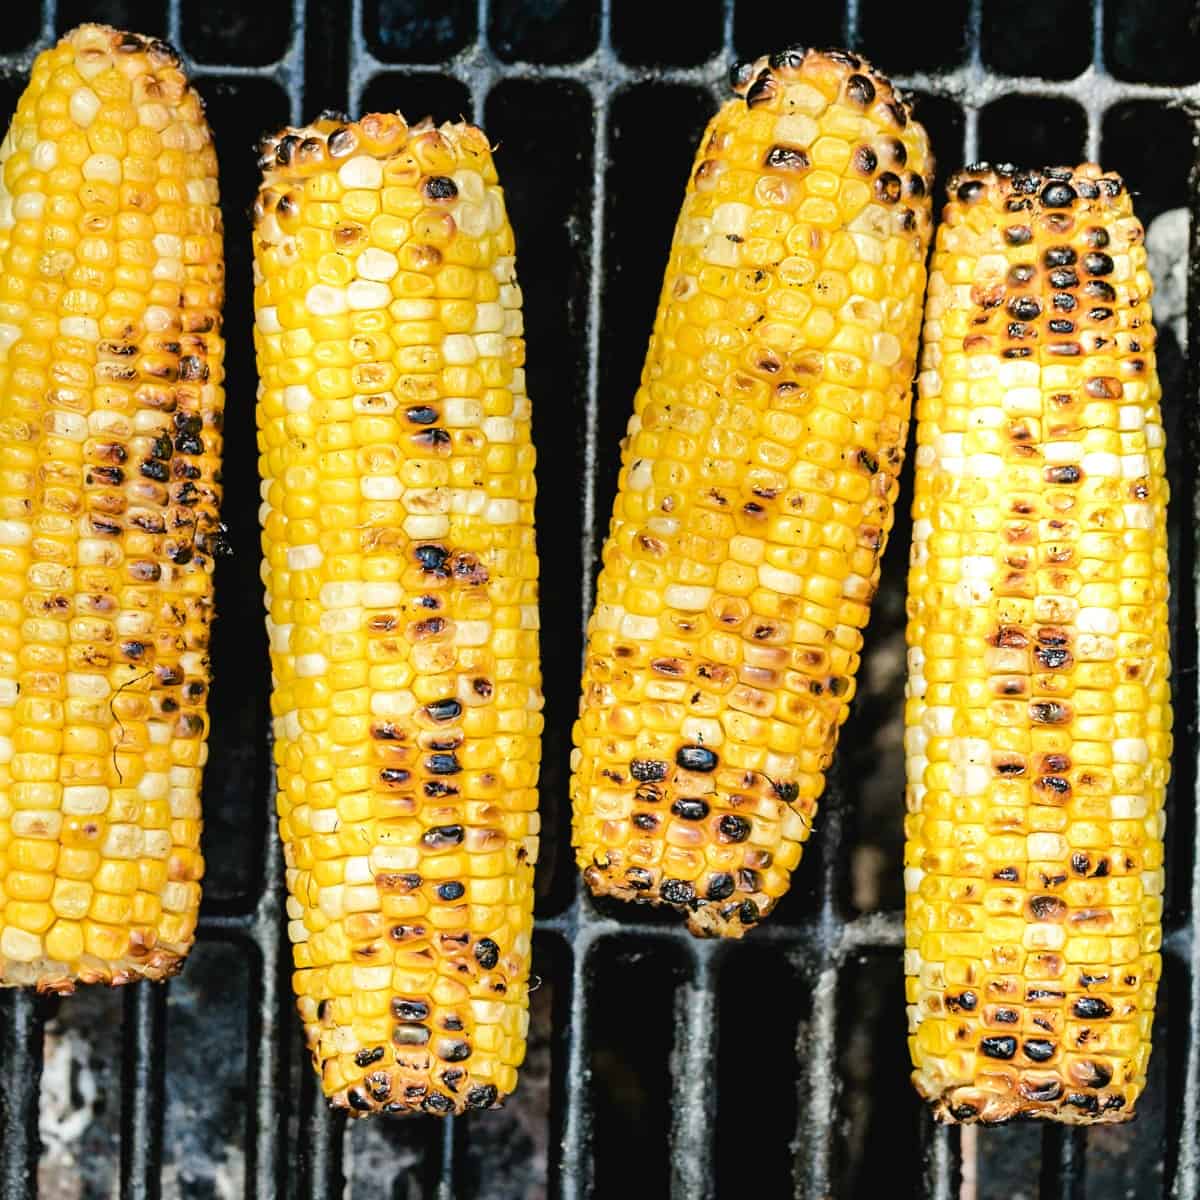 How To Grill Corn On The Cob The Best Corn On The Cob,Melt Chocolate For Strawberries